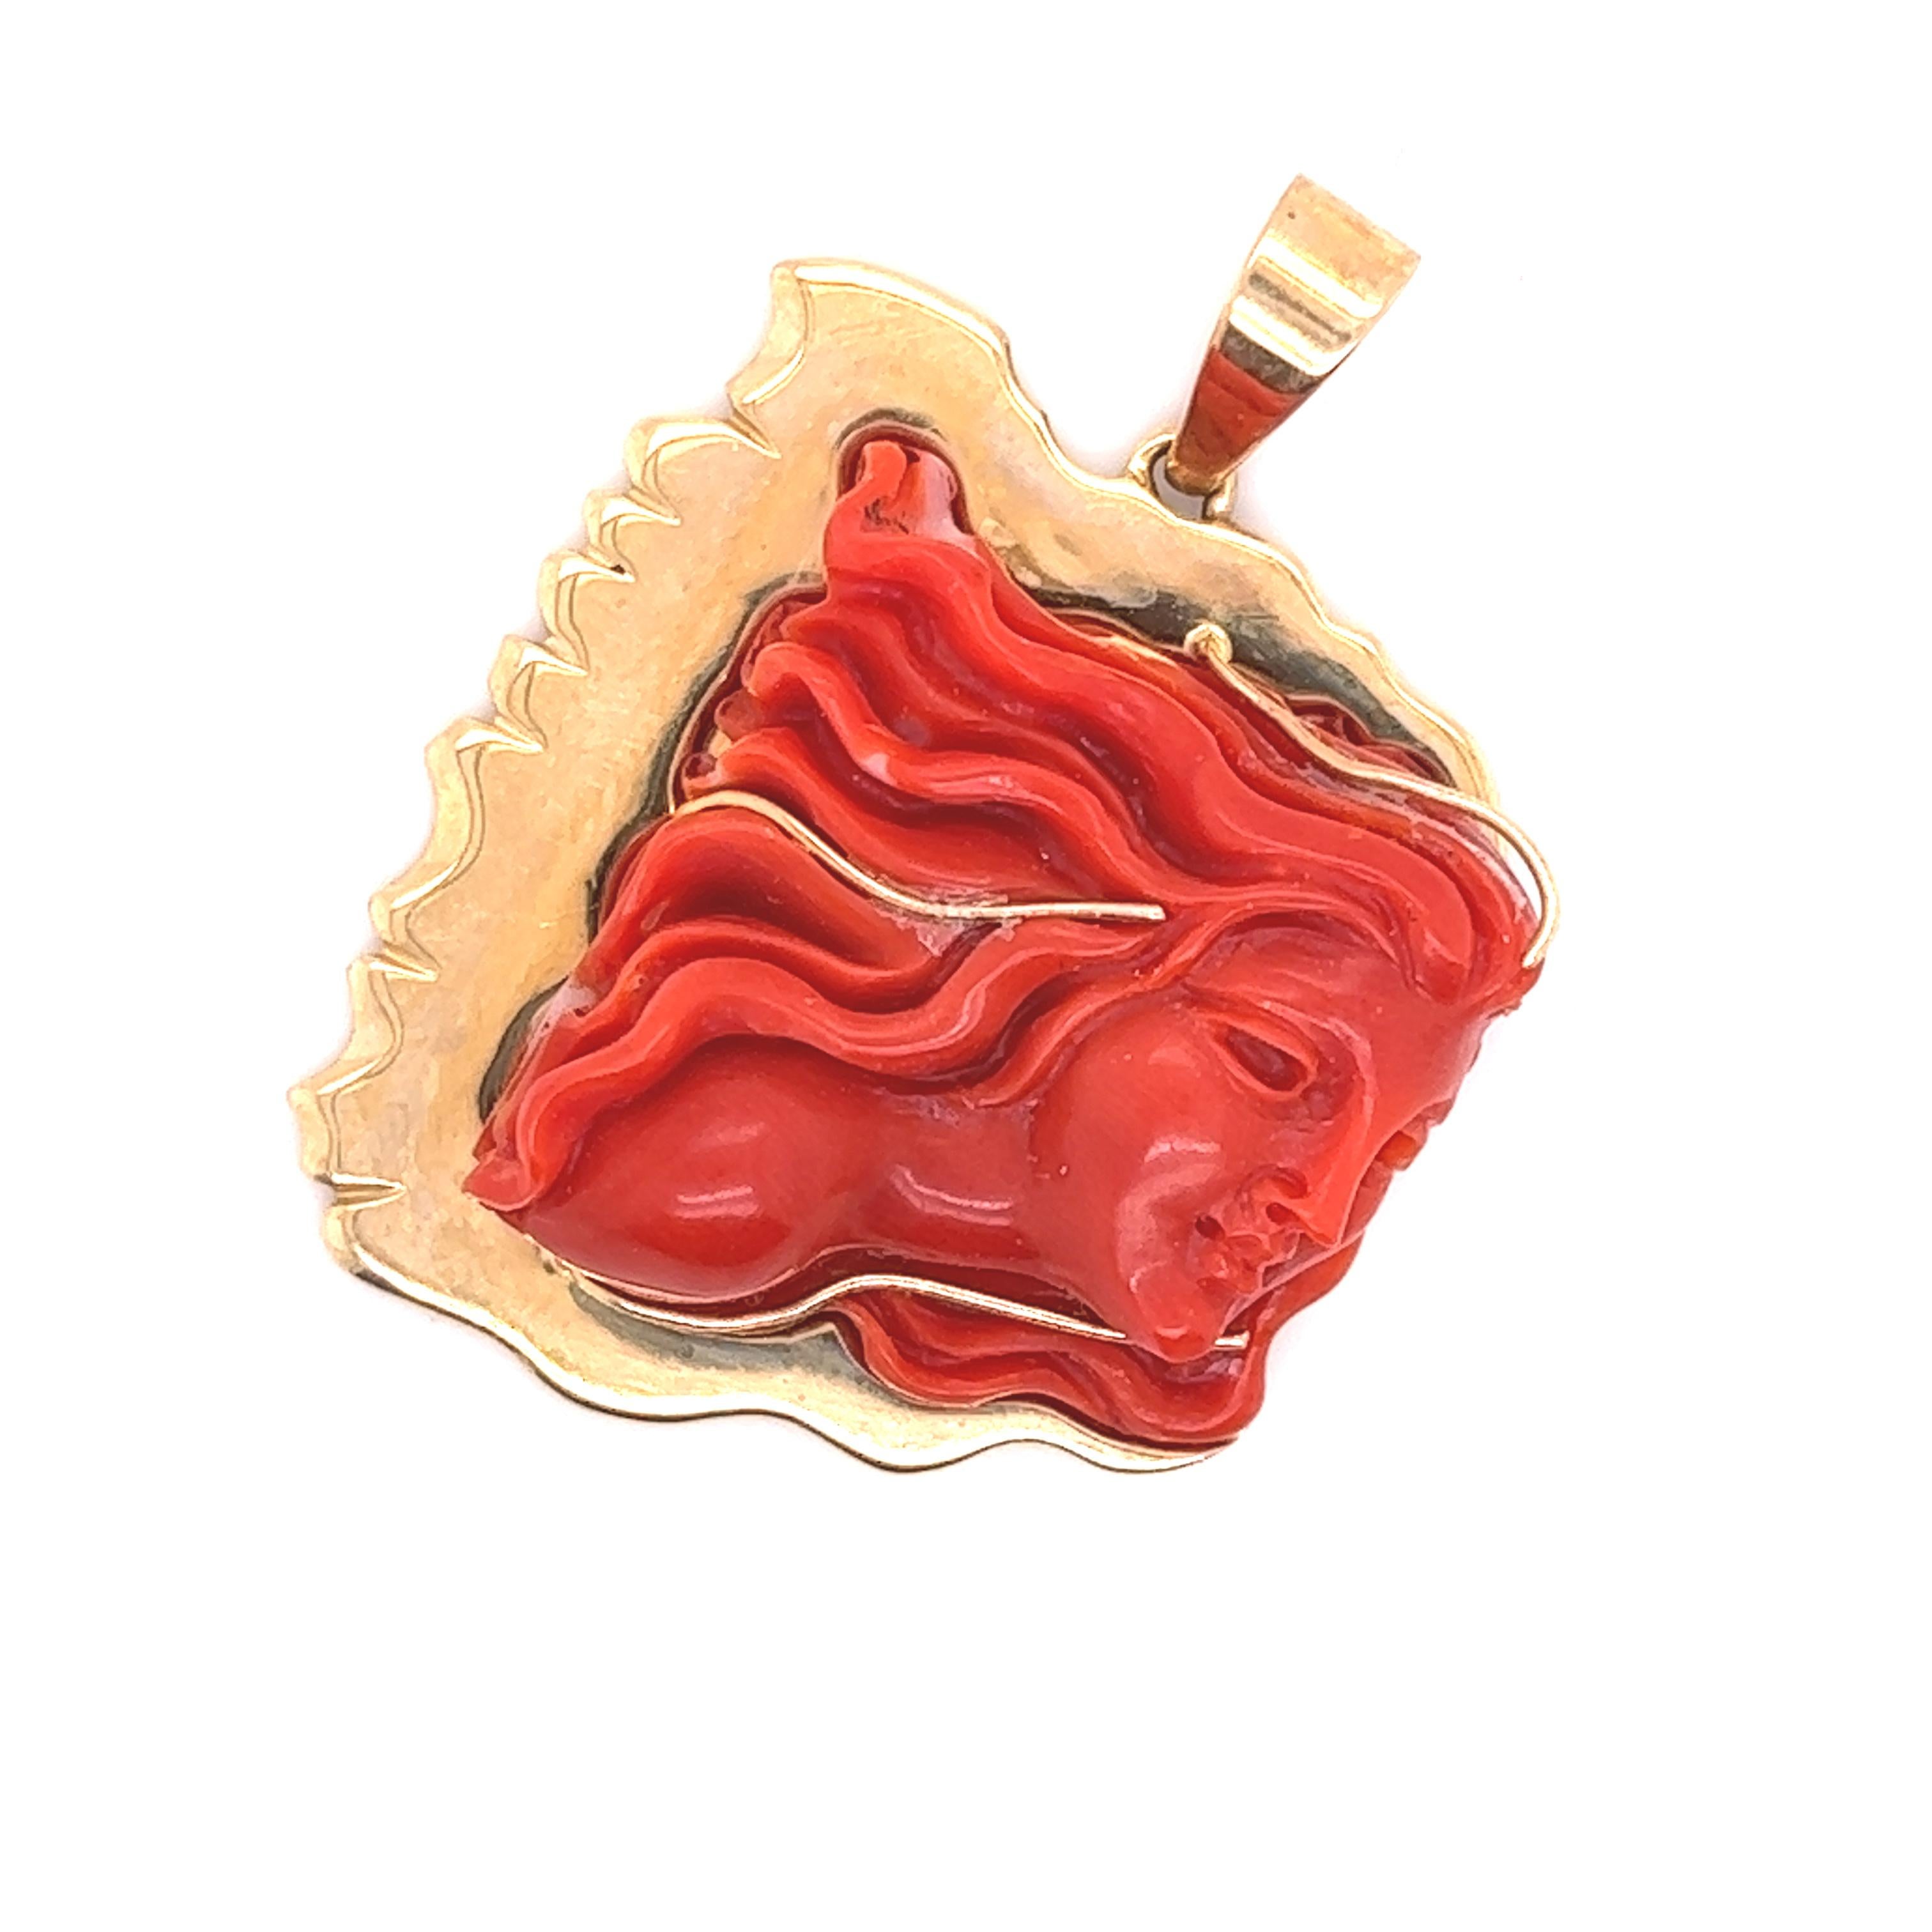 Beautiful vintage design crafted in 14k yellow gold. This pendant highlights one beautifully hand carved coral gemstone. The coral gemstone display's a vibrant red color and is beautifully carved in the form of a woman with long flowing hair. The